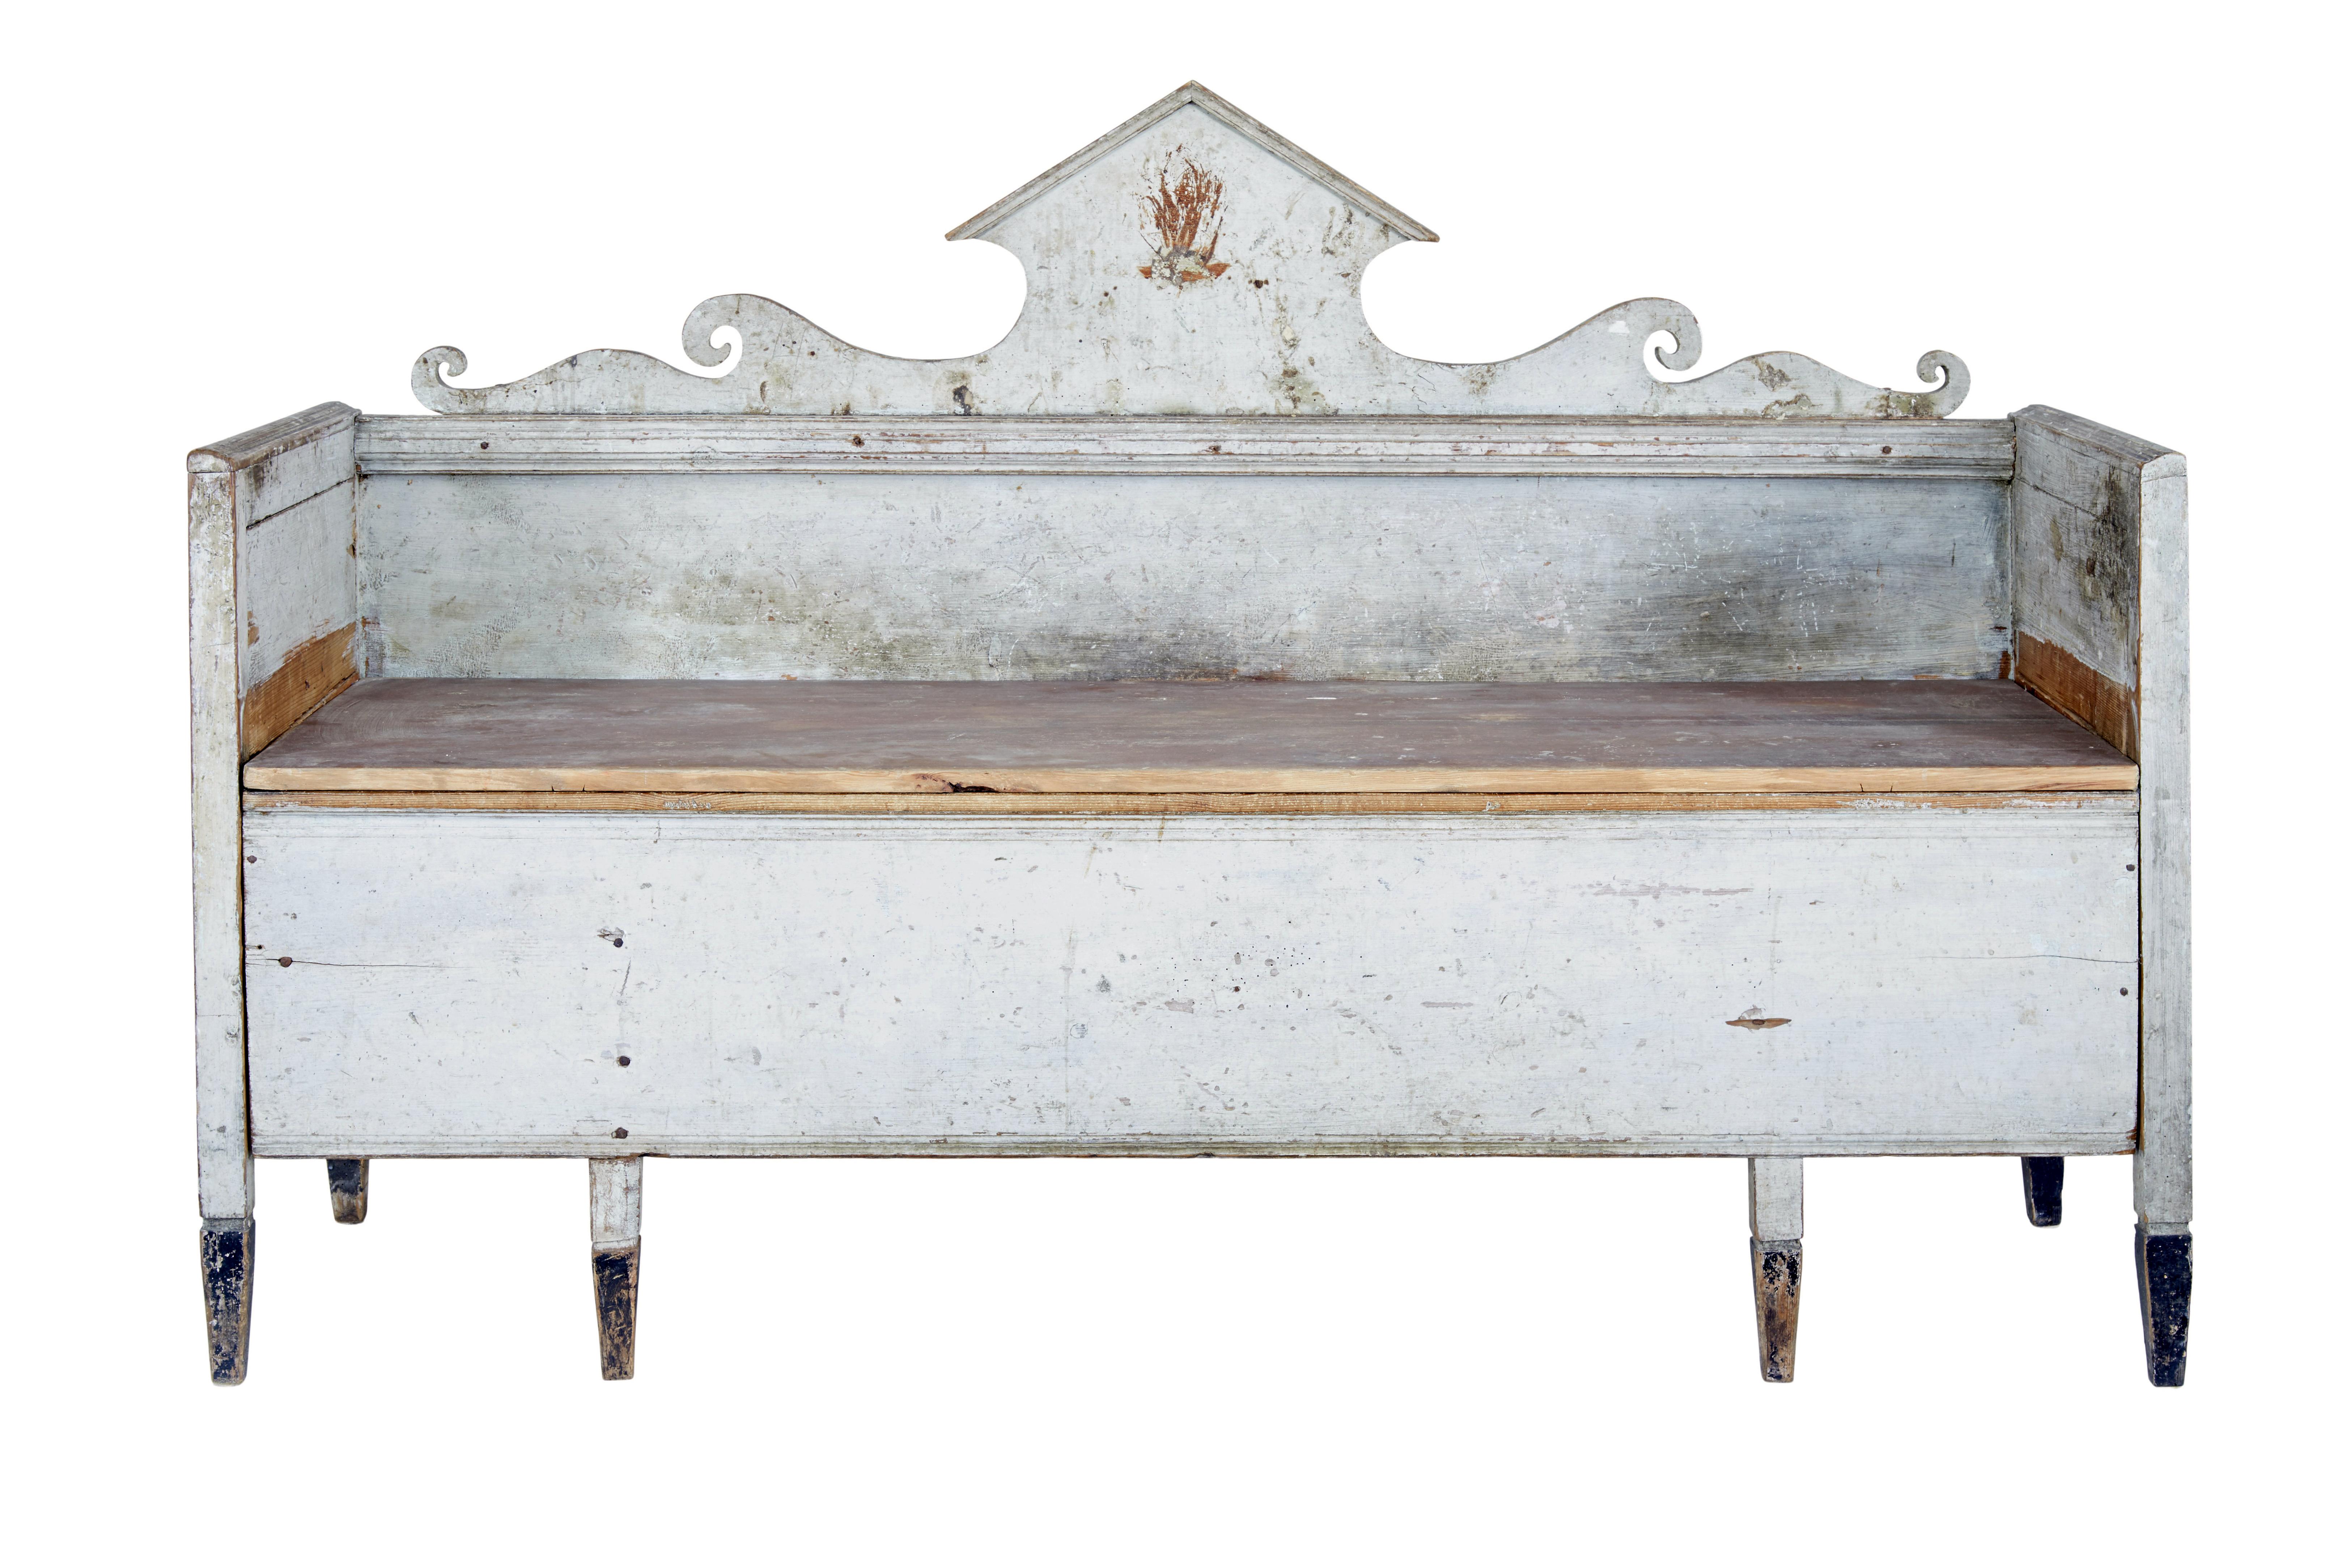 Swedish early 19th century Gustavian painted sofa circa 1810.

Stunning sofa in original paint.  This would have been a day bed with a pull out section to the front, but it has since been sealed shut, this could be released if desired.

Pediment